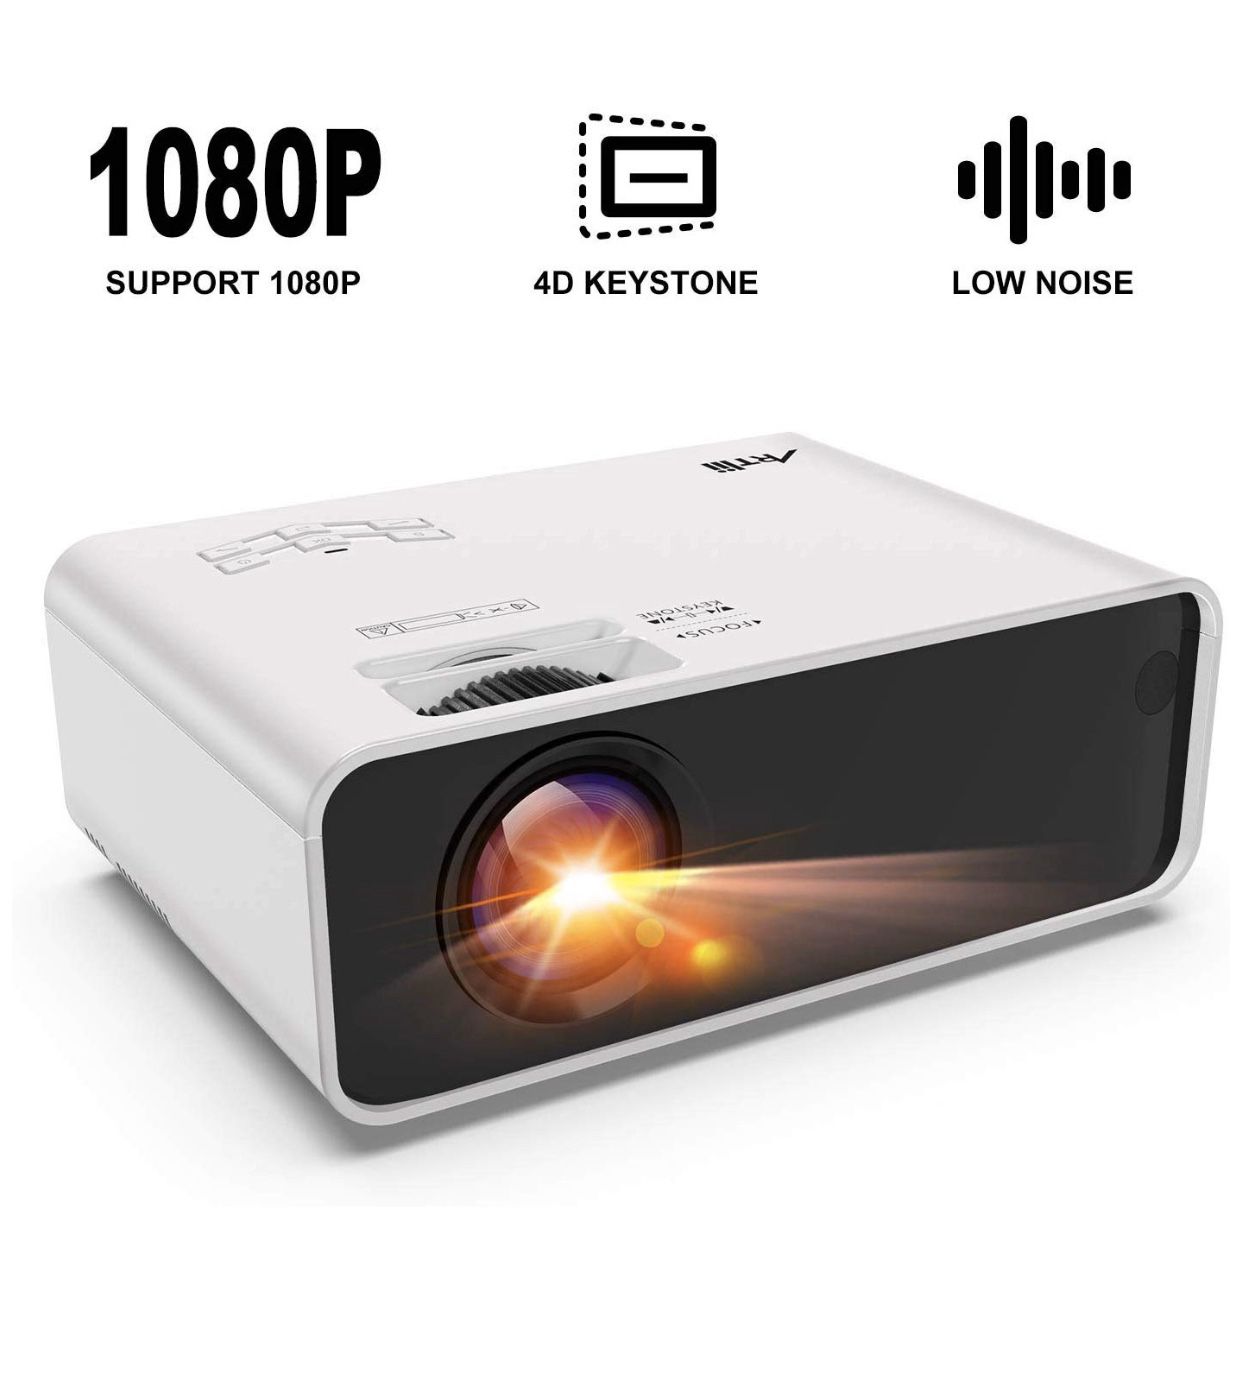 Mini Projector Portable Projector with ± 45 ° Digital 4D Keystone Correction Correct Lower Noise, HiFi Stereo, 1080P Support Movie Projector Compatib